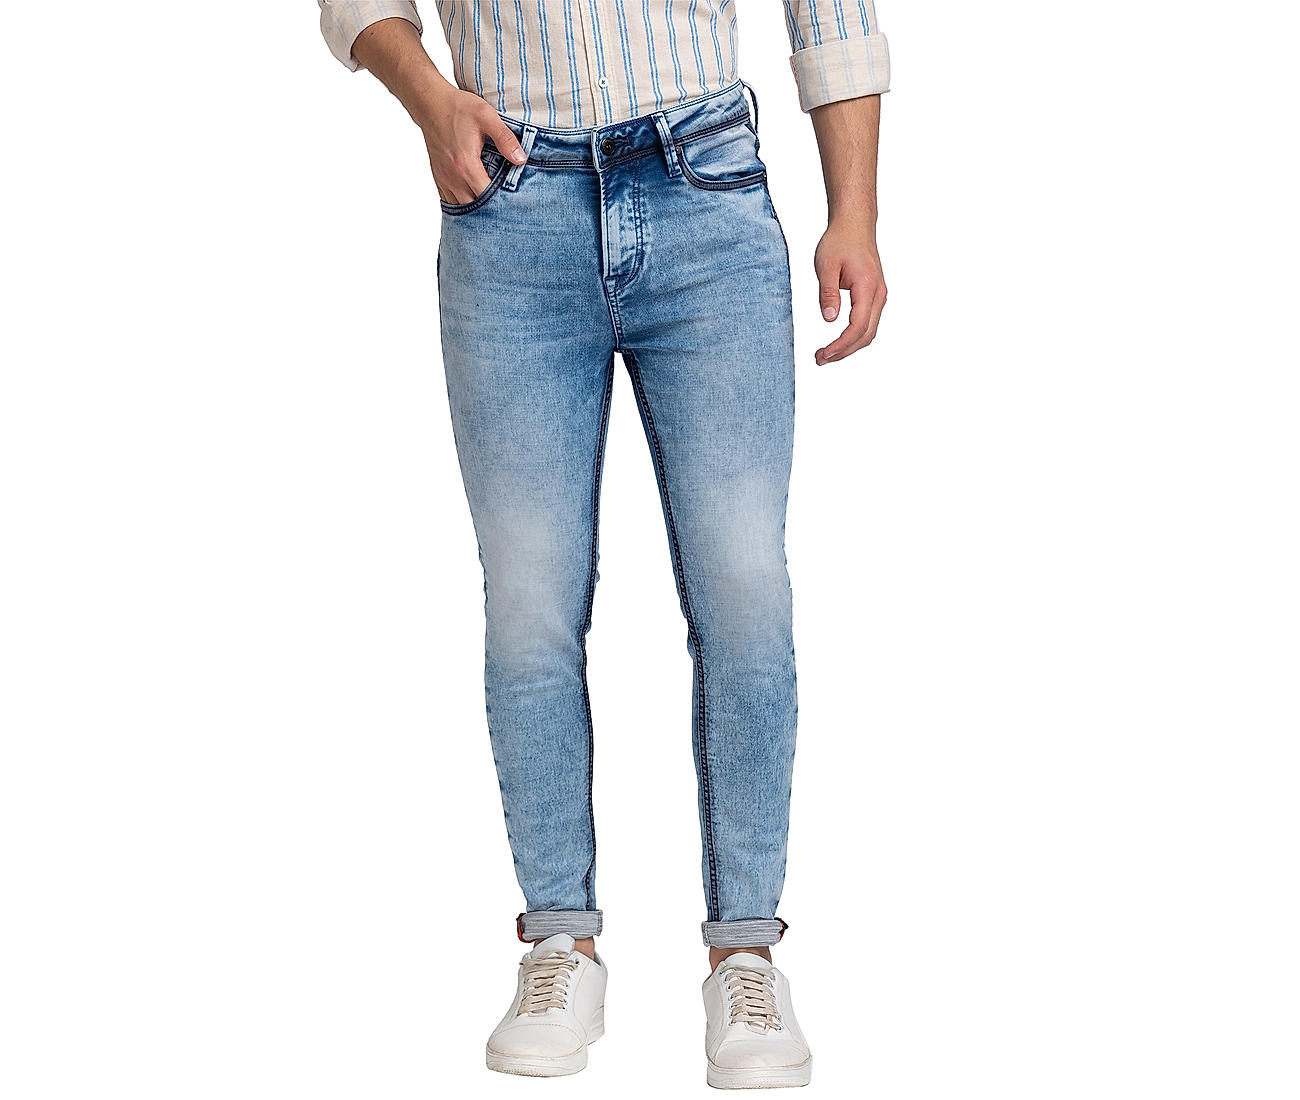 Buy Indigo Blue Skinny Fit Denim Deluxe Stretch Jeans Online at Muftijeans